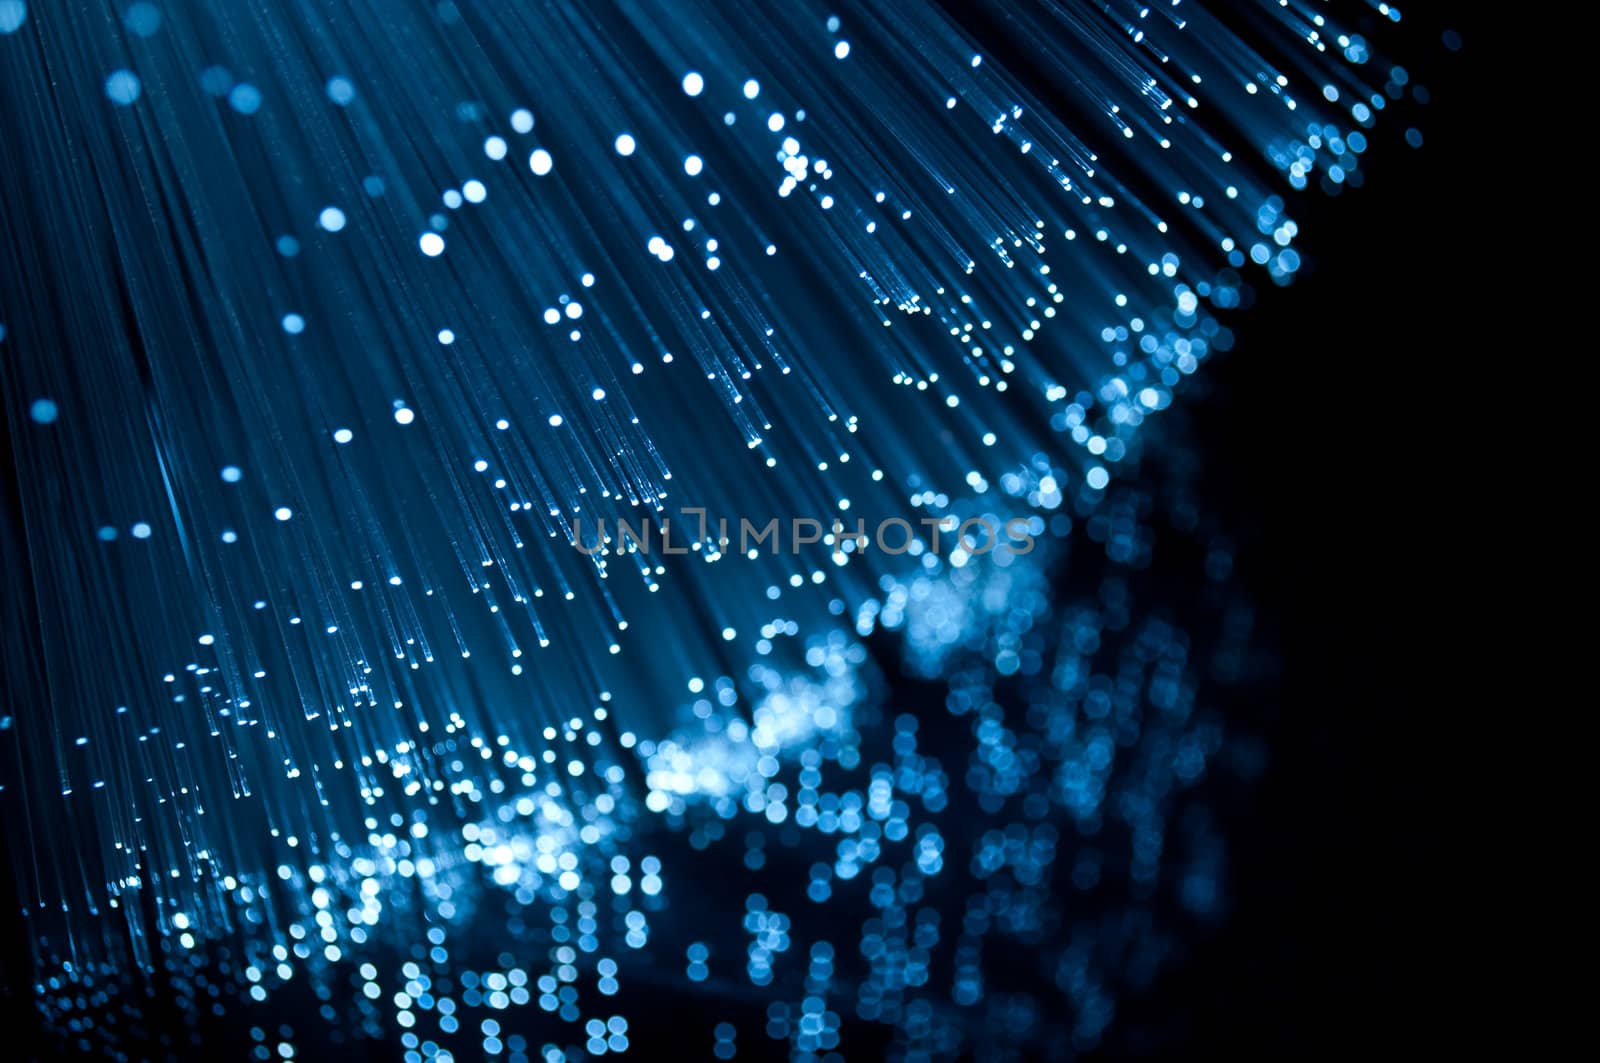 Close up on the ends of many blue illuminated fibre optic light strands against a black background and reflecting into the foreground.